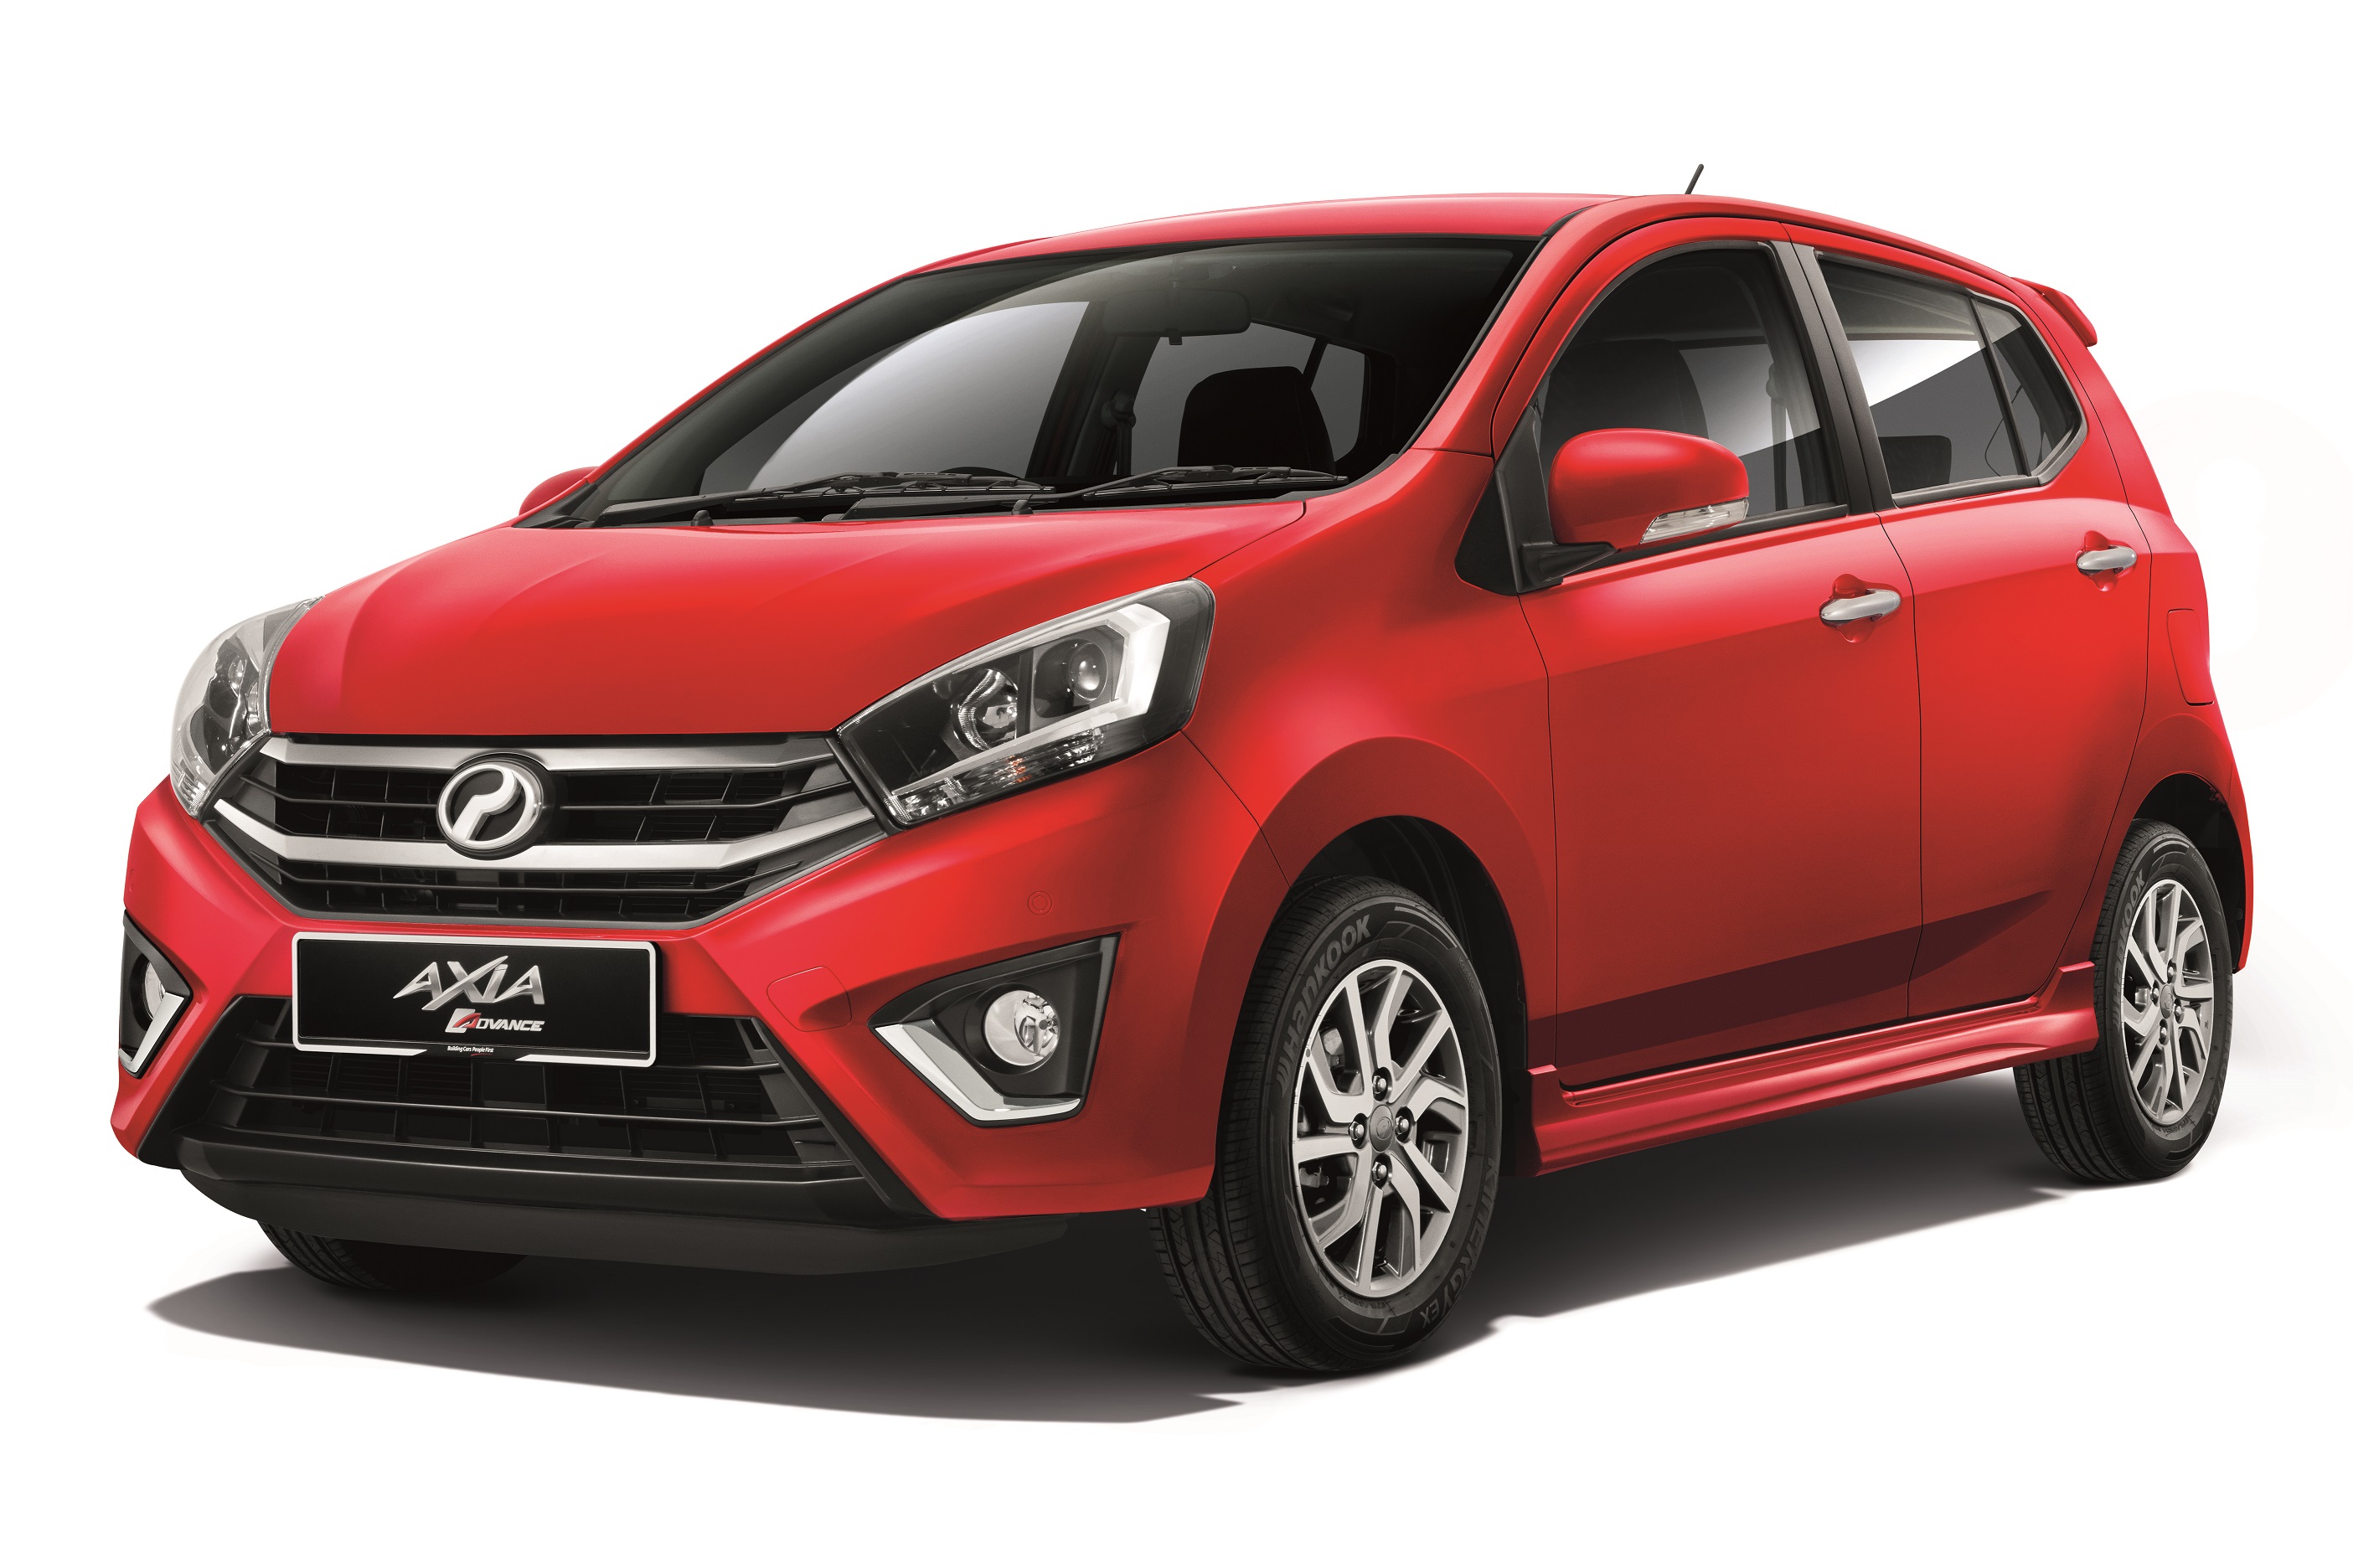 Perodua sets new sales record – 82,700 from January to April  News and reviews on Malaysian